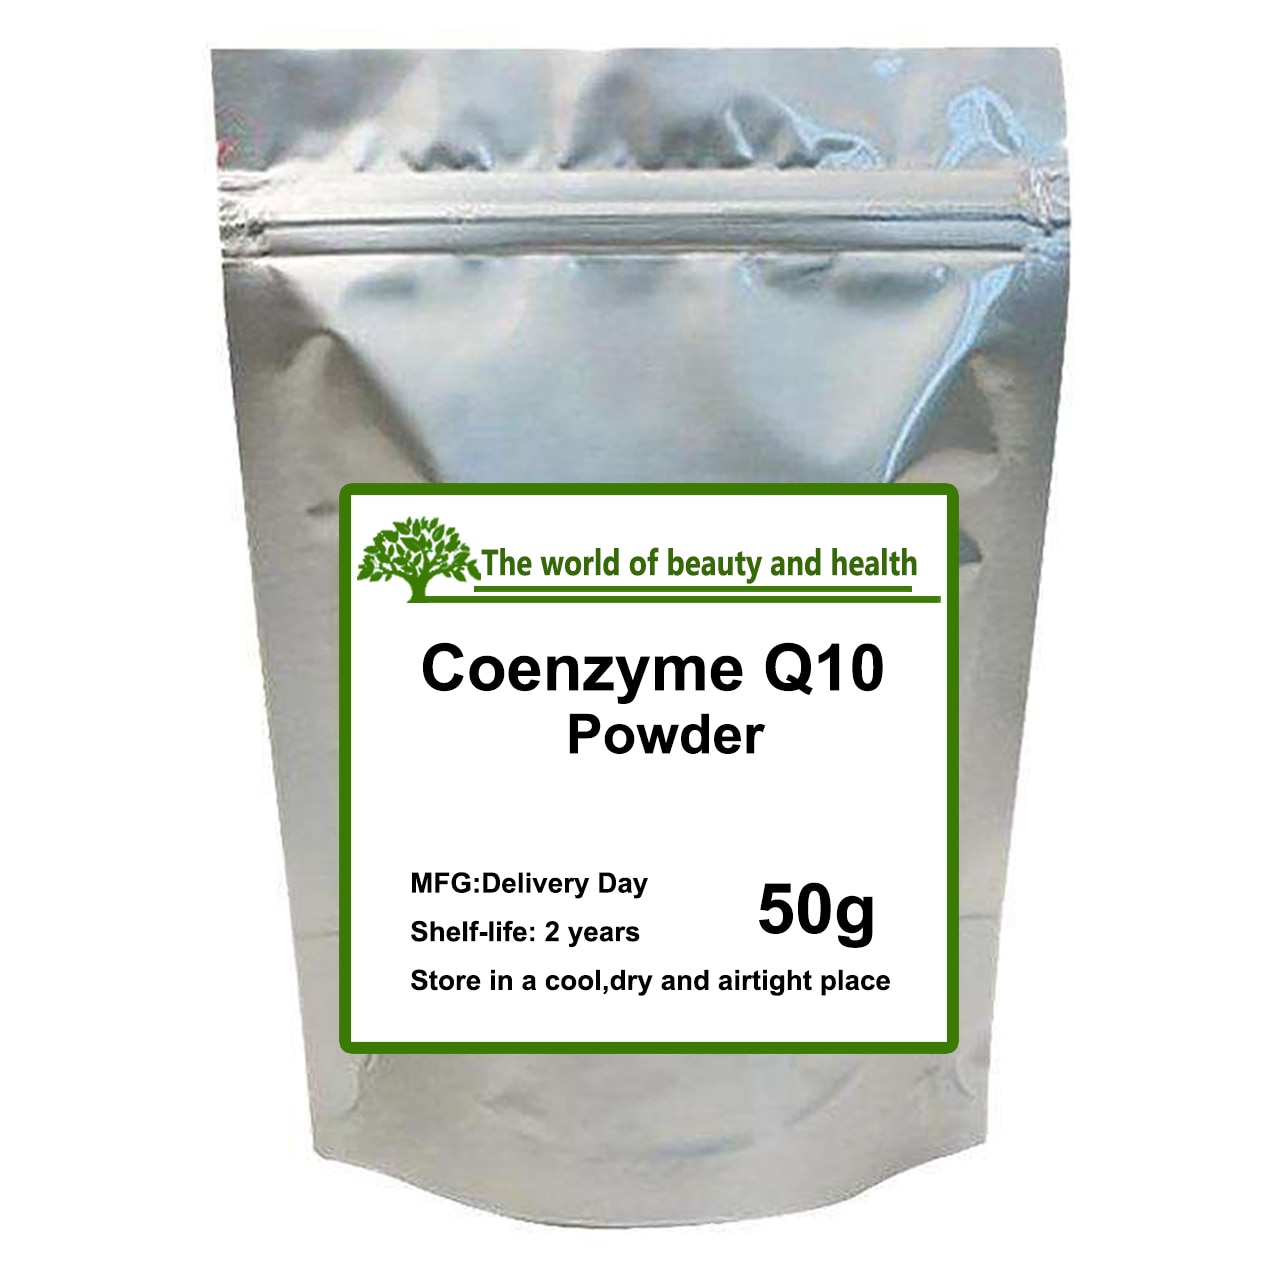 High Quality Water soluble Coenzyme Q10 Powder,Remove Freckle, Anti Wrinkle and Delay Aging